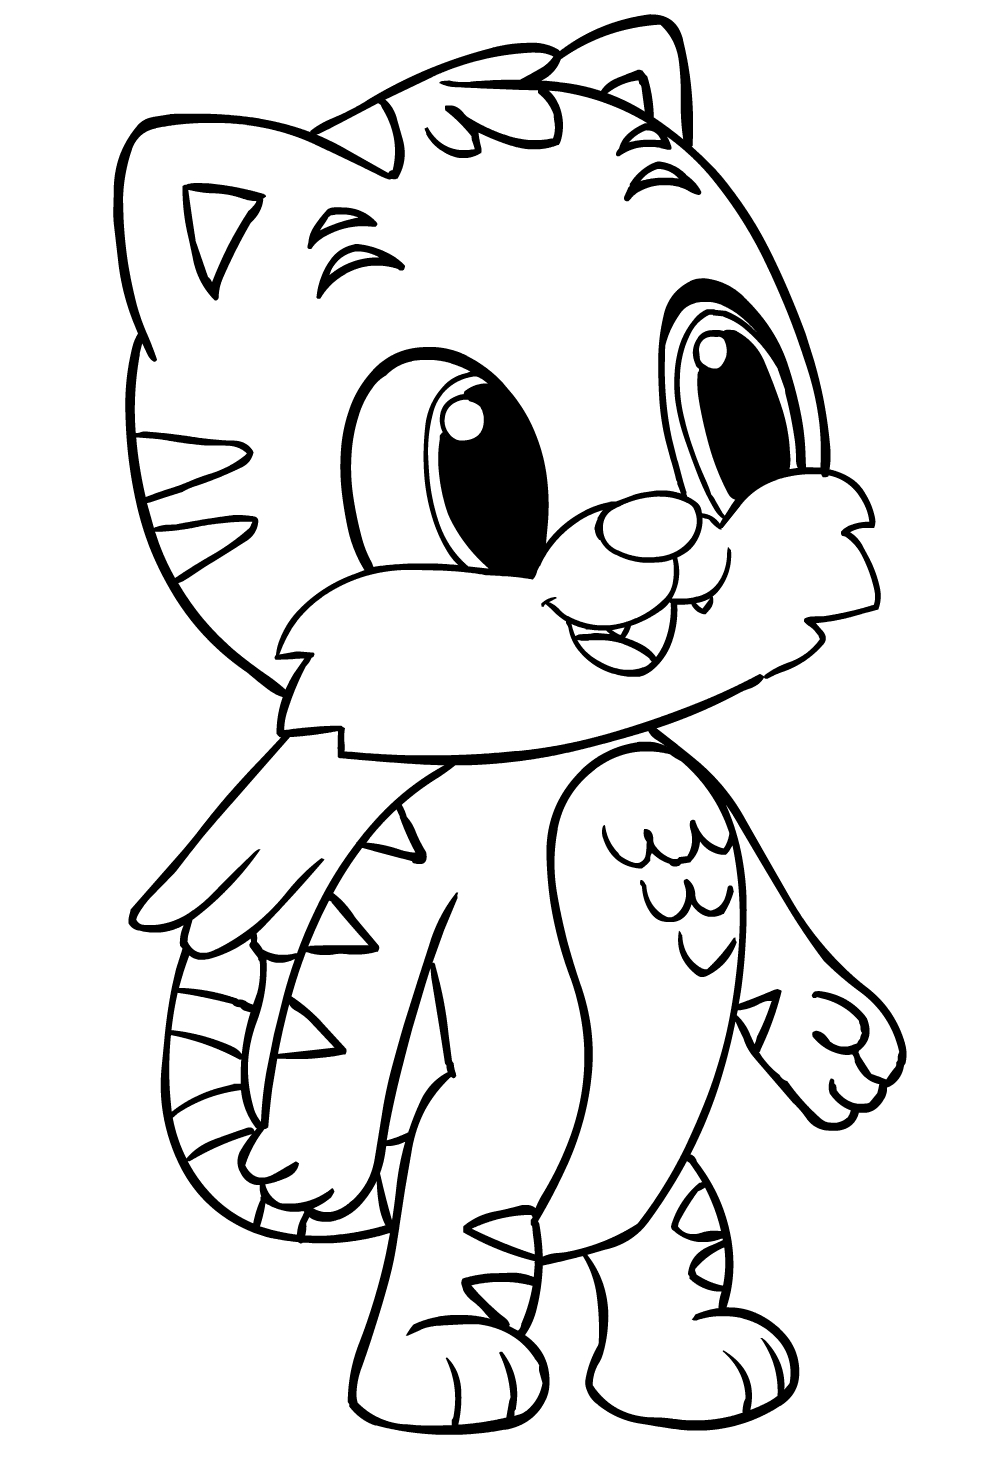 Hatchimals   coloring page to print and coloring - Drawing 2